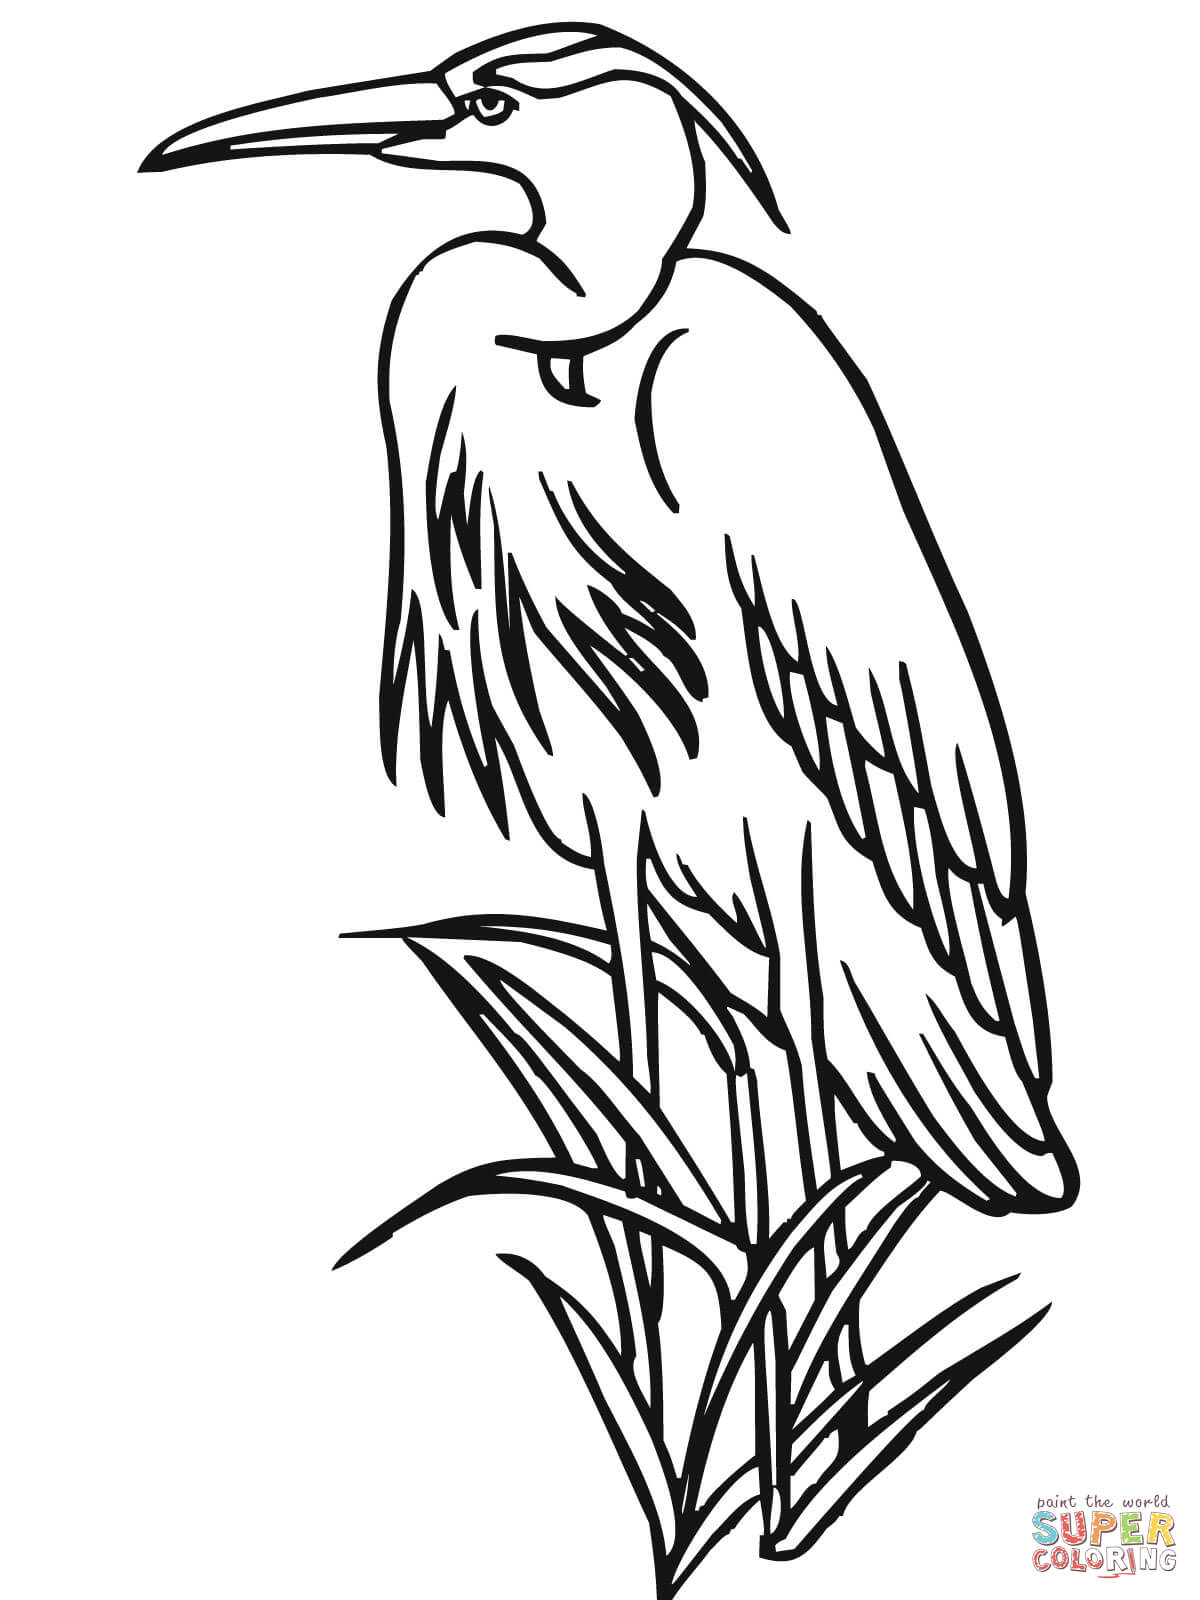 Heron coloring pages | Free Coloring Pages